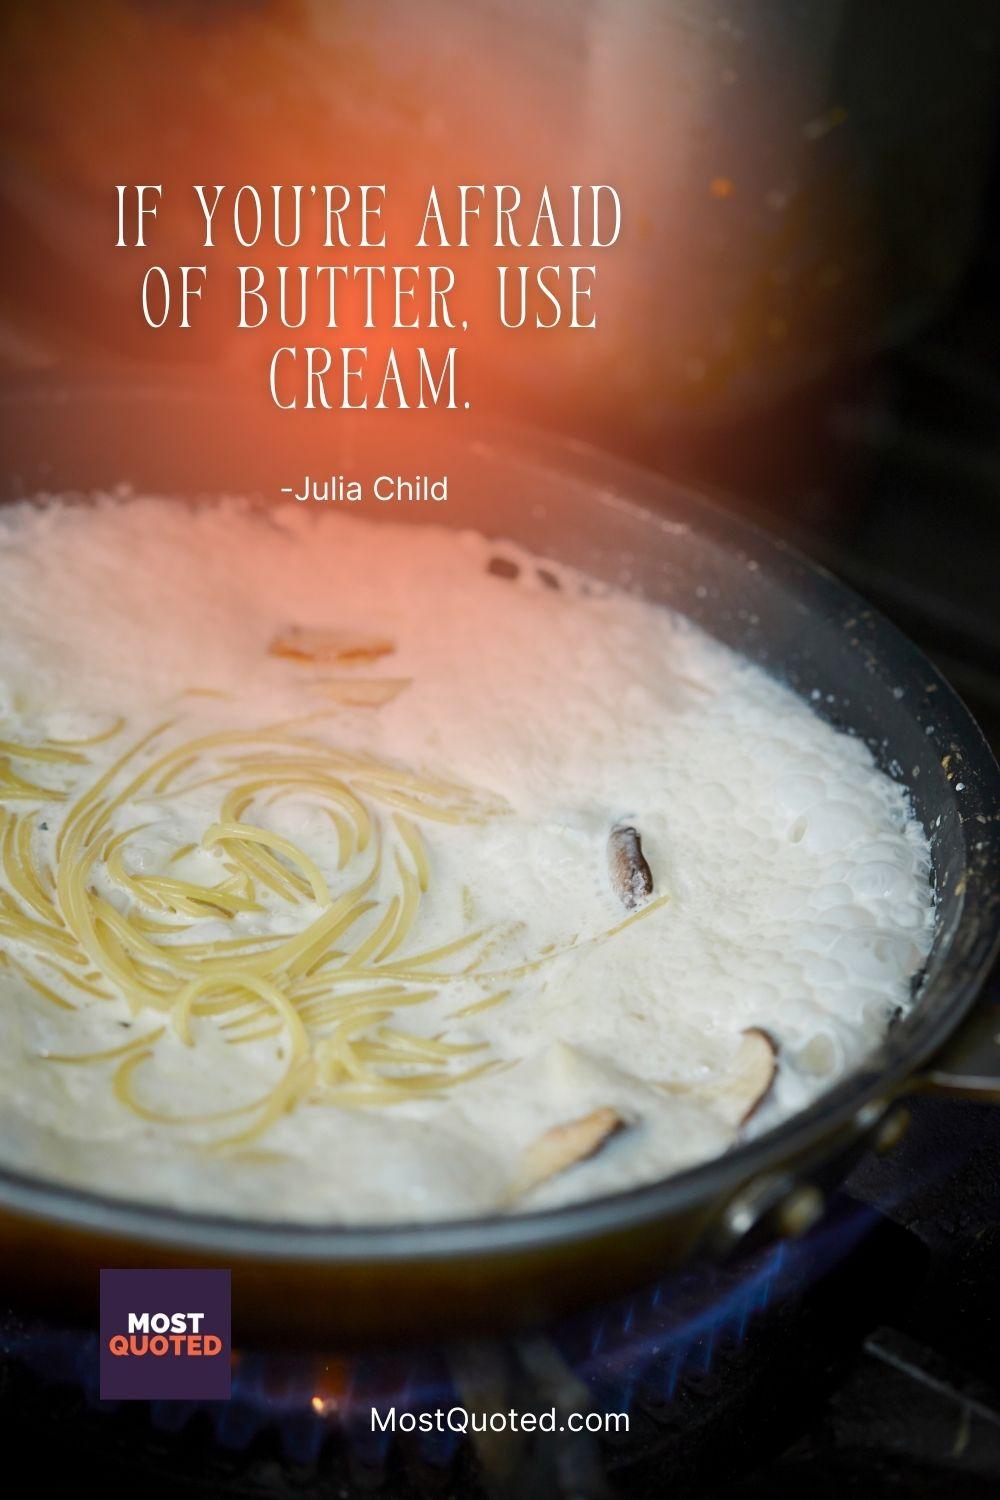 If you’re afraid of butter, use cream. - Julia Child